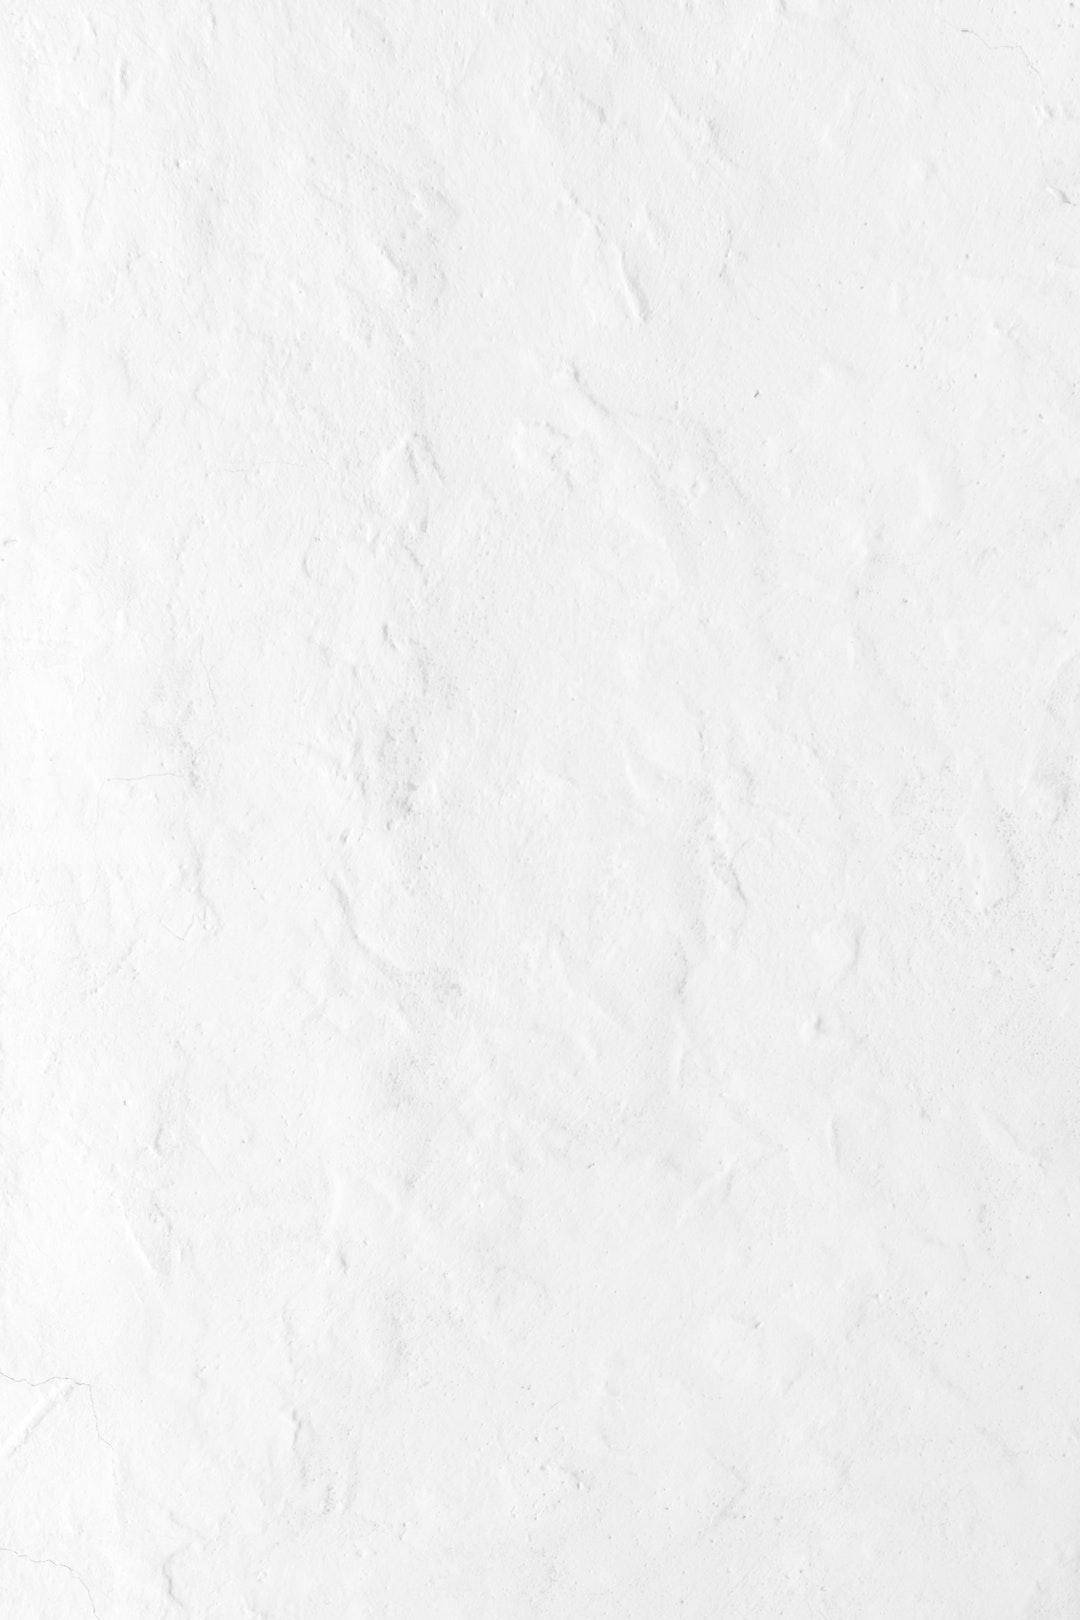 Textured White Color Paper Wallpaper